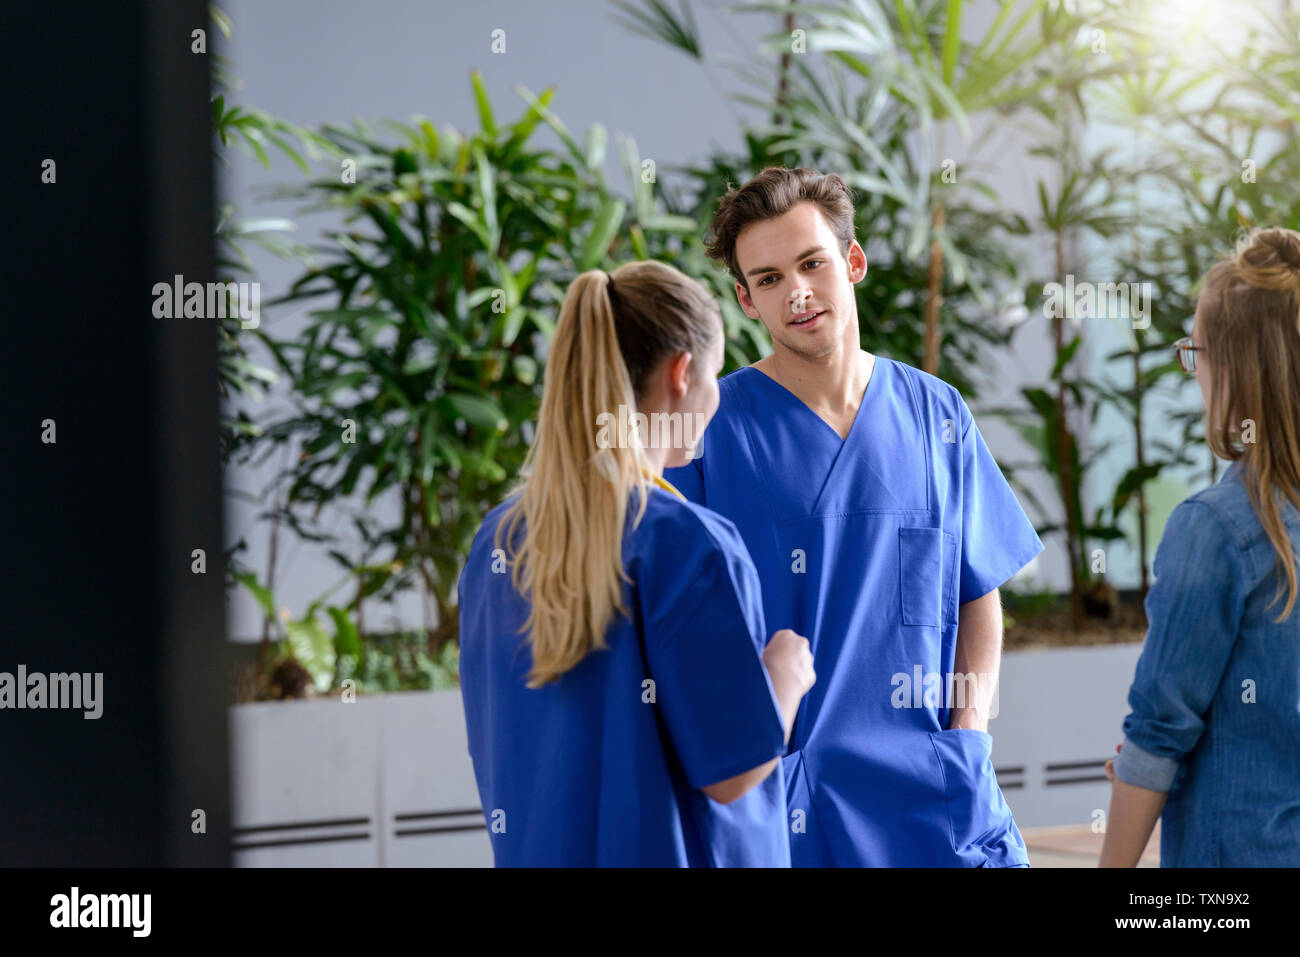 Male and female junior doctors chatting outside hospital Stock Photo